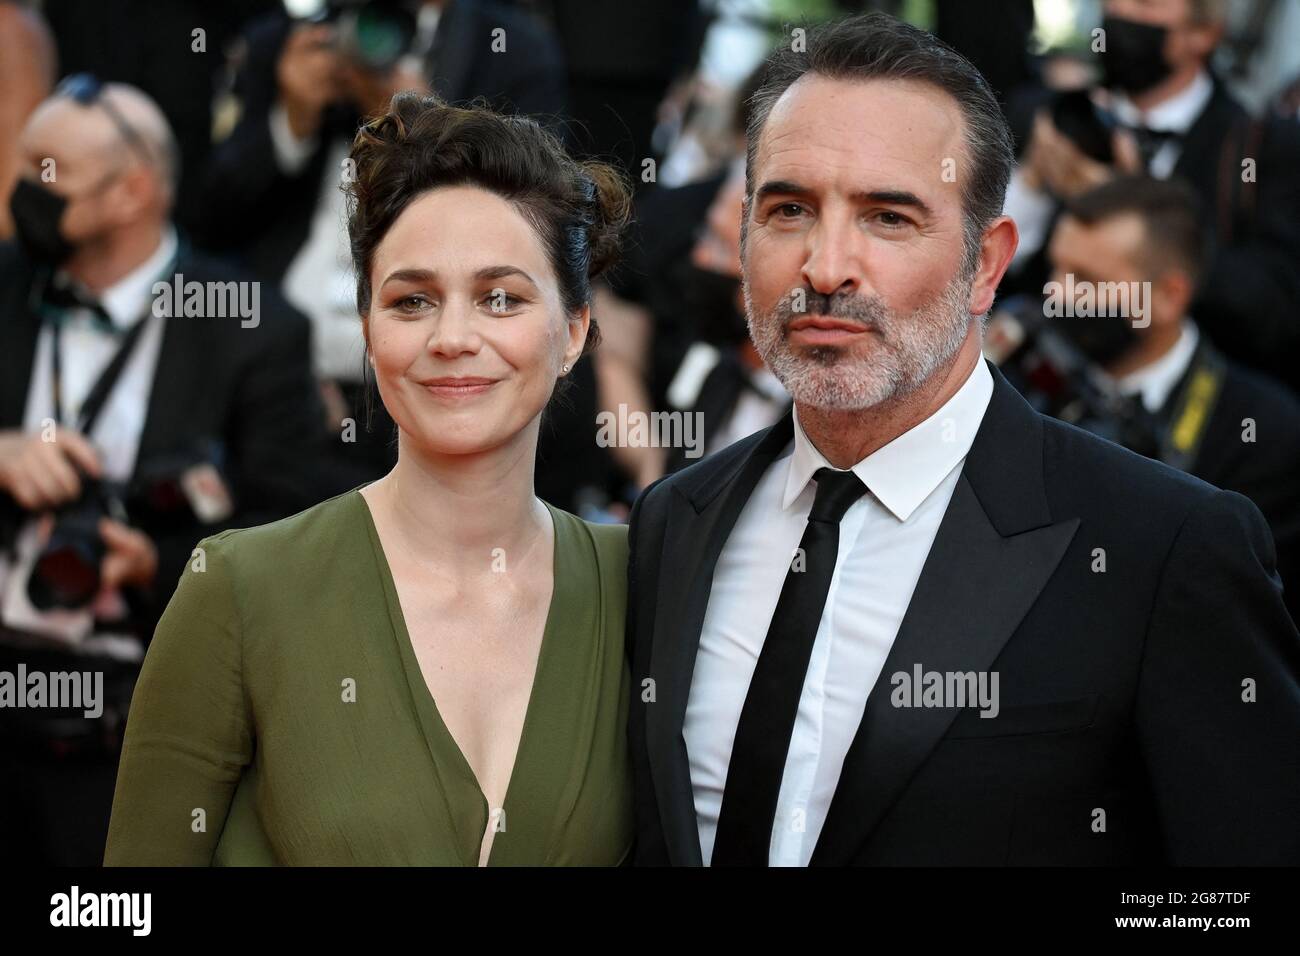 Nathalie Pechalat, Jean Dujardin attending the Closing Ceremony of the 74th  Cannes Film Festival in Cannes, France on July 17 2021. Photo by Julien  Reynaud/APS-Medias/ABACAPRESS.COM Stock Photo - Alamy